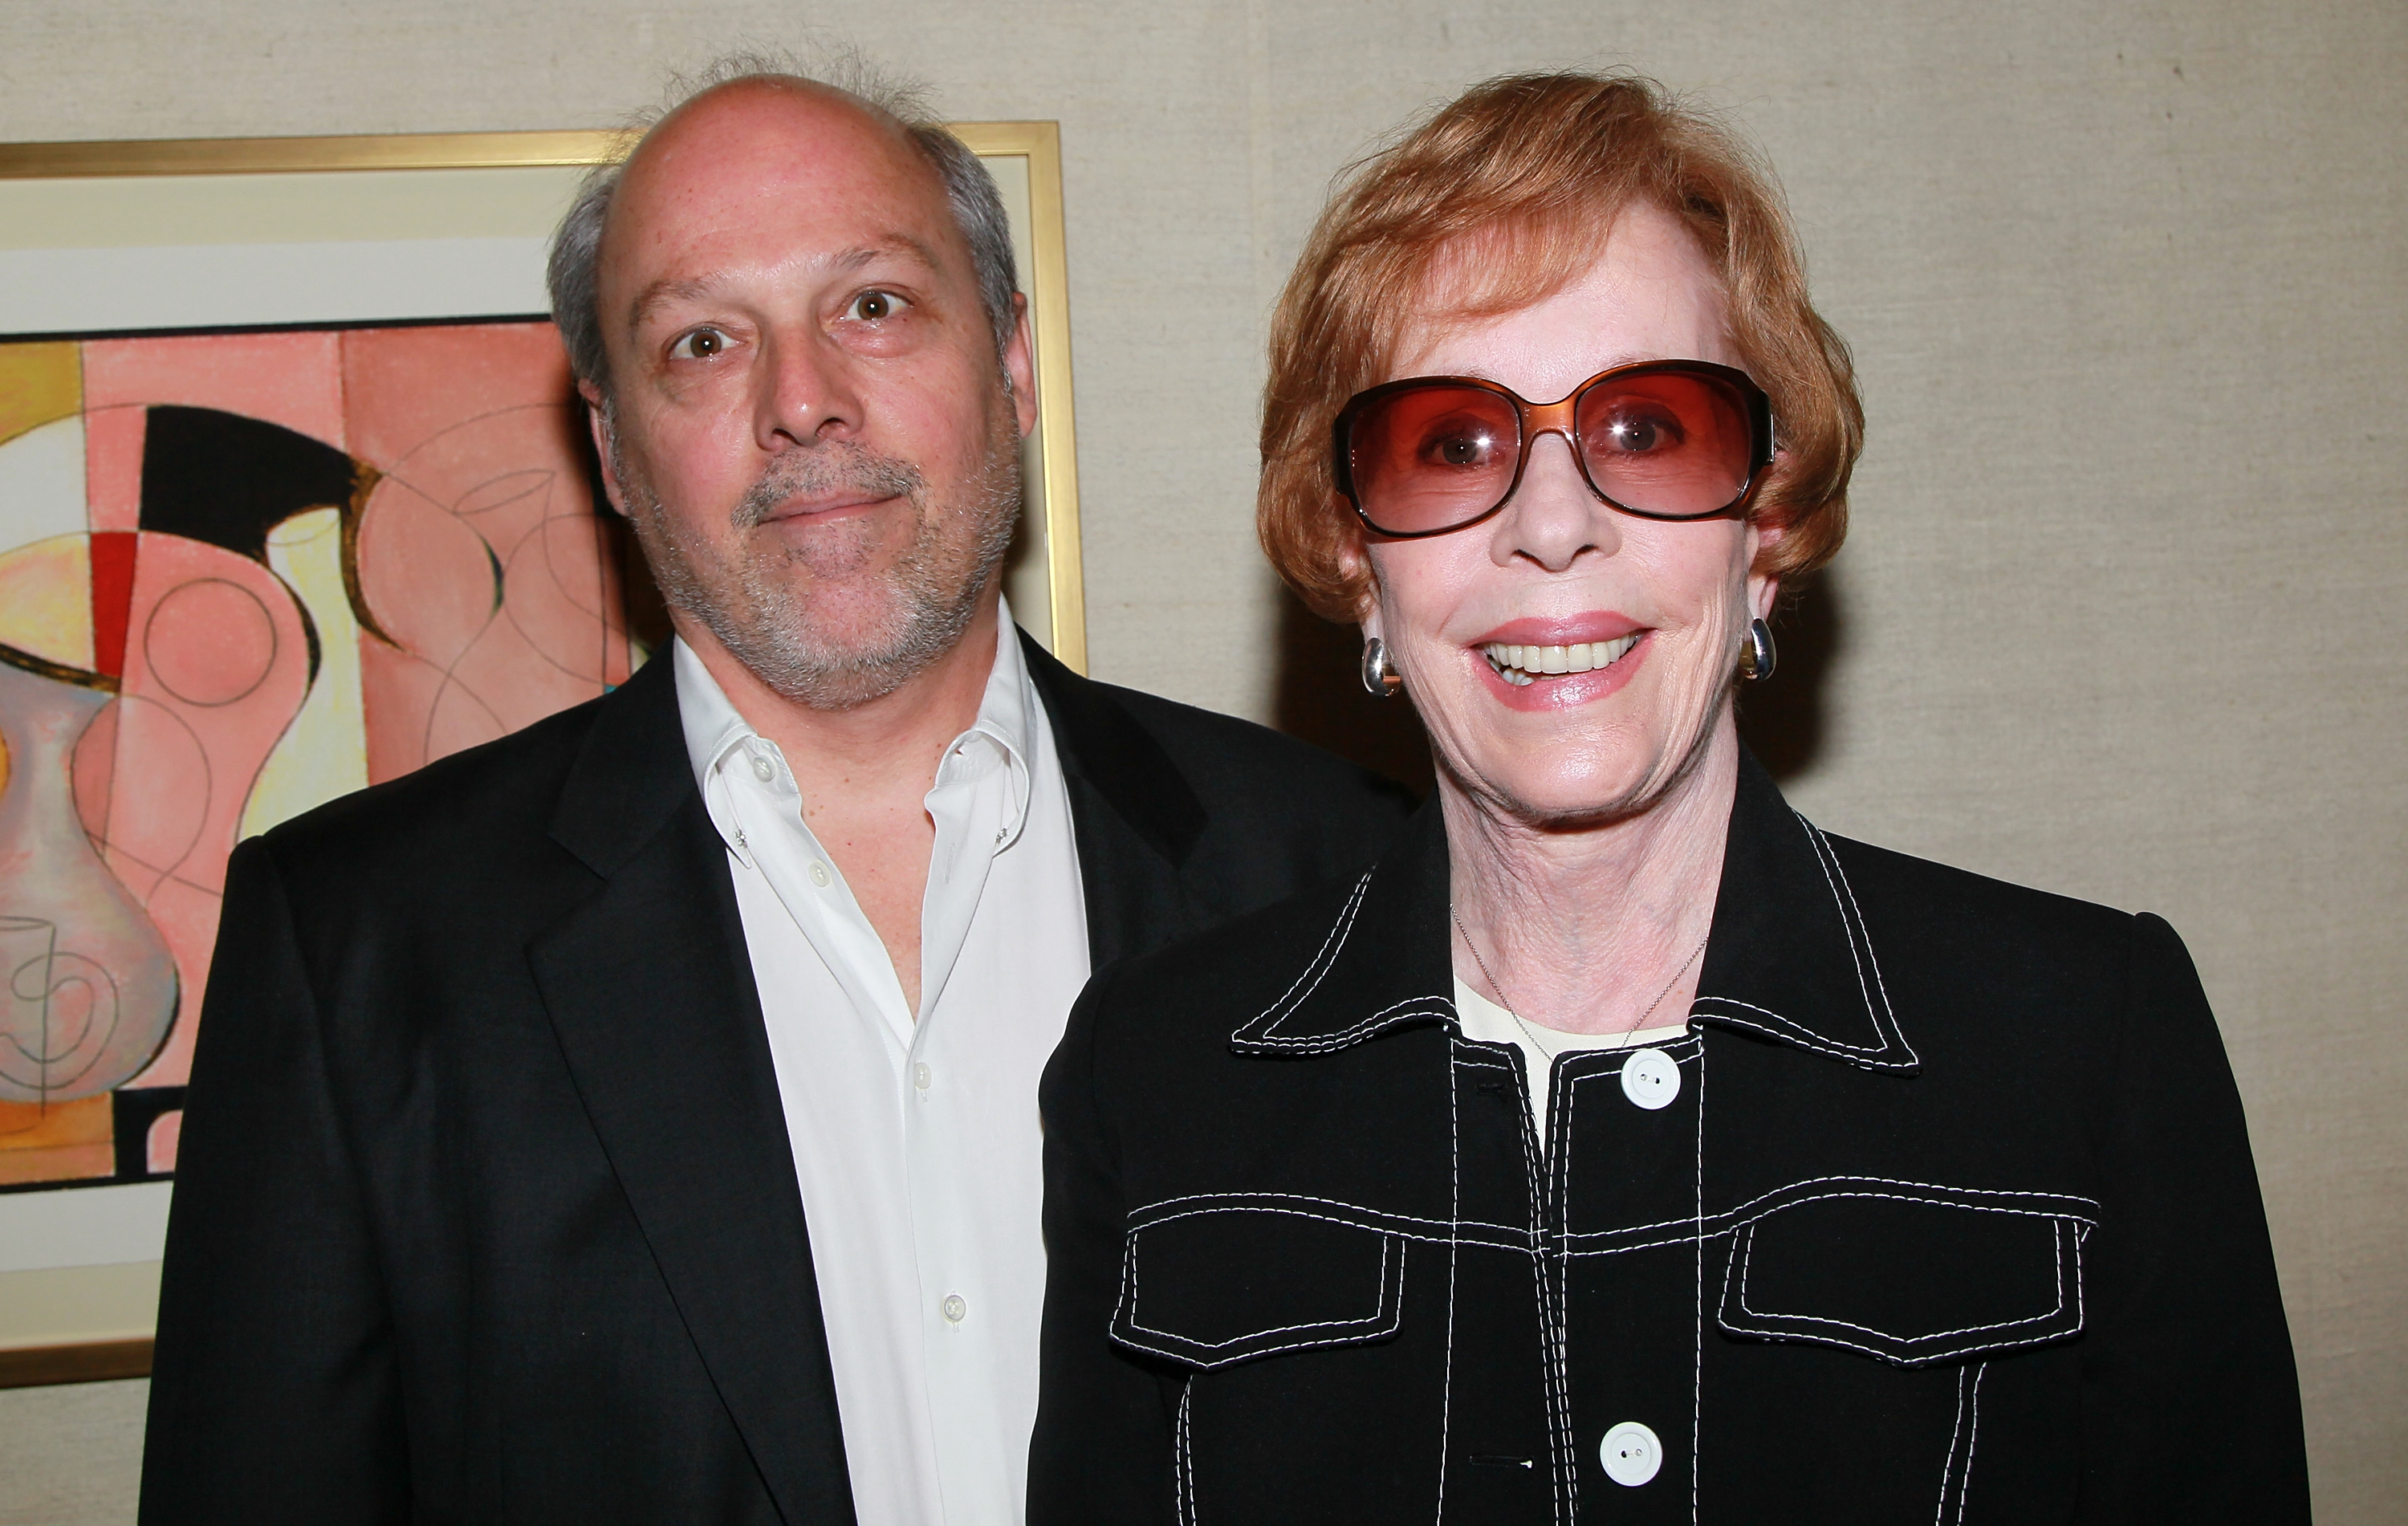 Carol Burnett and her husband Brian Miller in California, in 2010. | Source: Getty Images